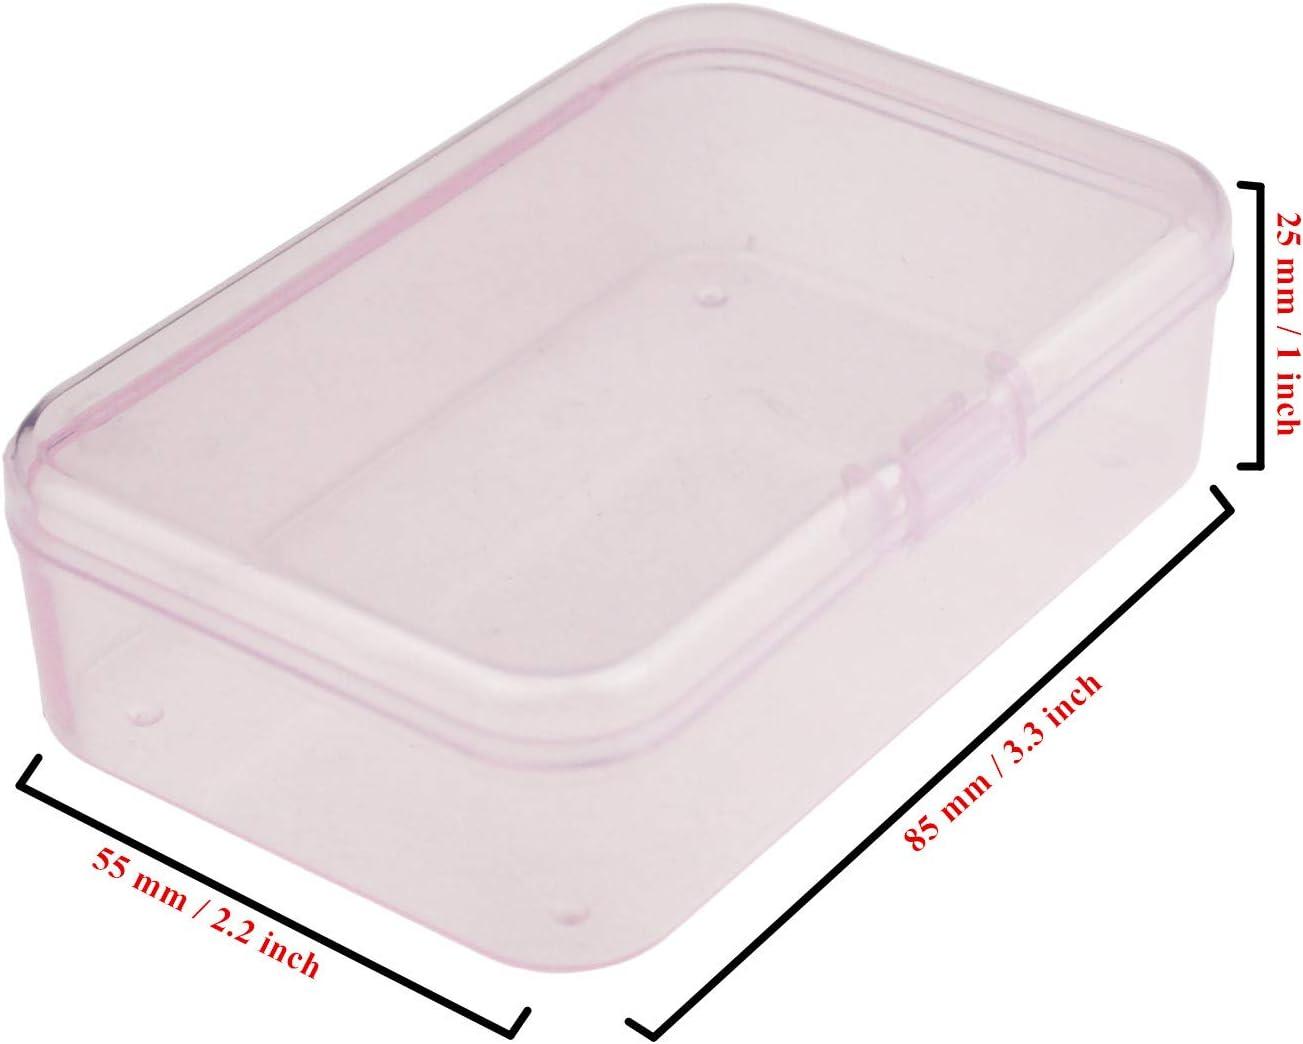 Mini Plastic Food Containers With Lids Small Square Square Plastic